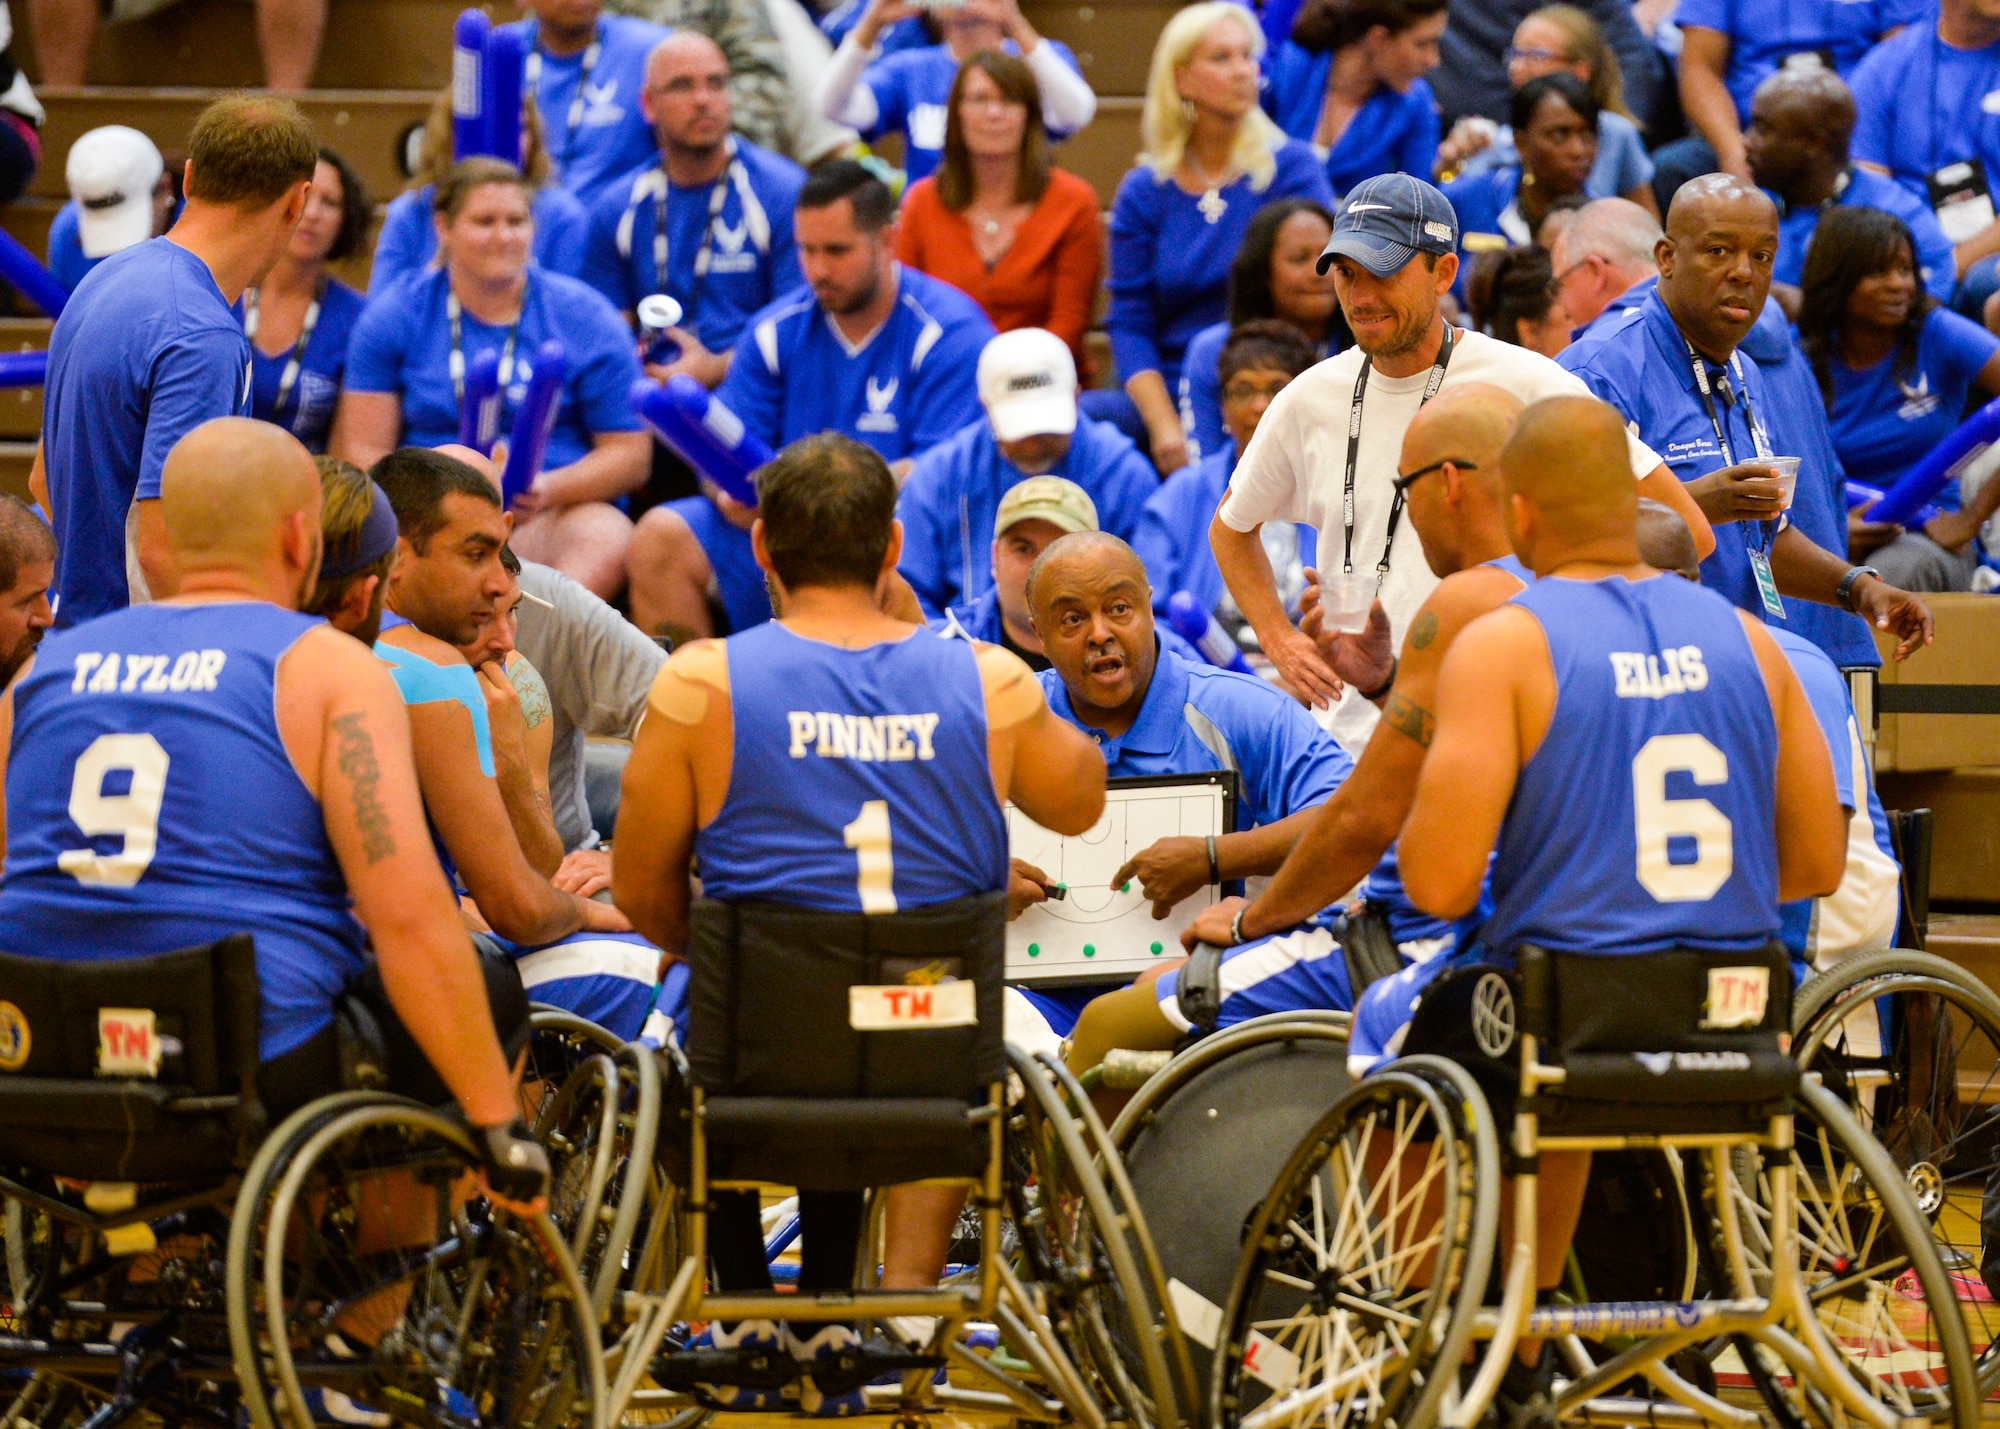 Coach Willie Jackson goes over the next play during an Air Force time out in their game against the Navy at the 2014 Warrior Games Sept. 29, 2014, at the United States Olympic Training Center in Colorado Springs, Colo. The Air Force team lost 38-19 and will play Special Operations in the next round. (U.S Air Force photo/Staff Sgt. Devon Suits) 